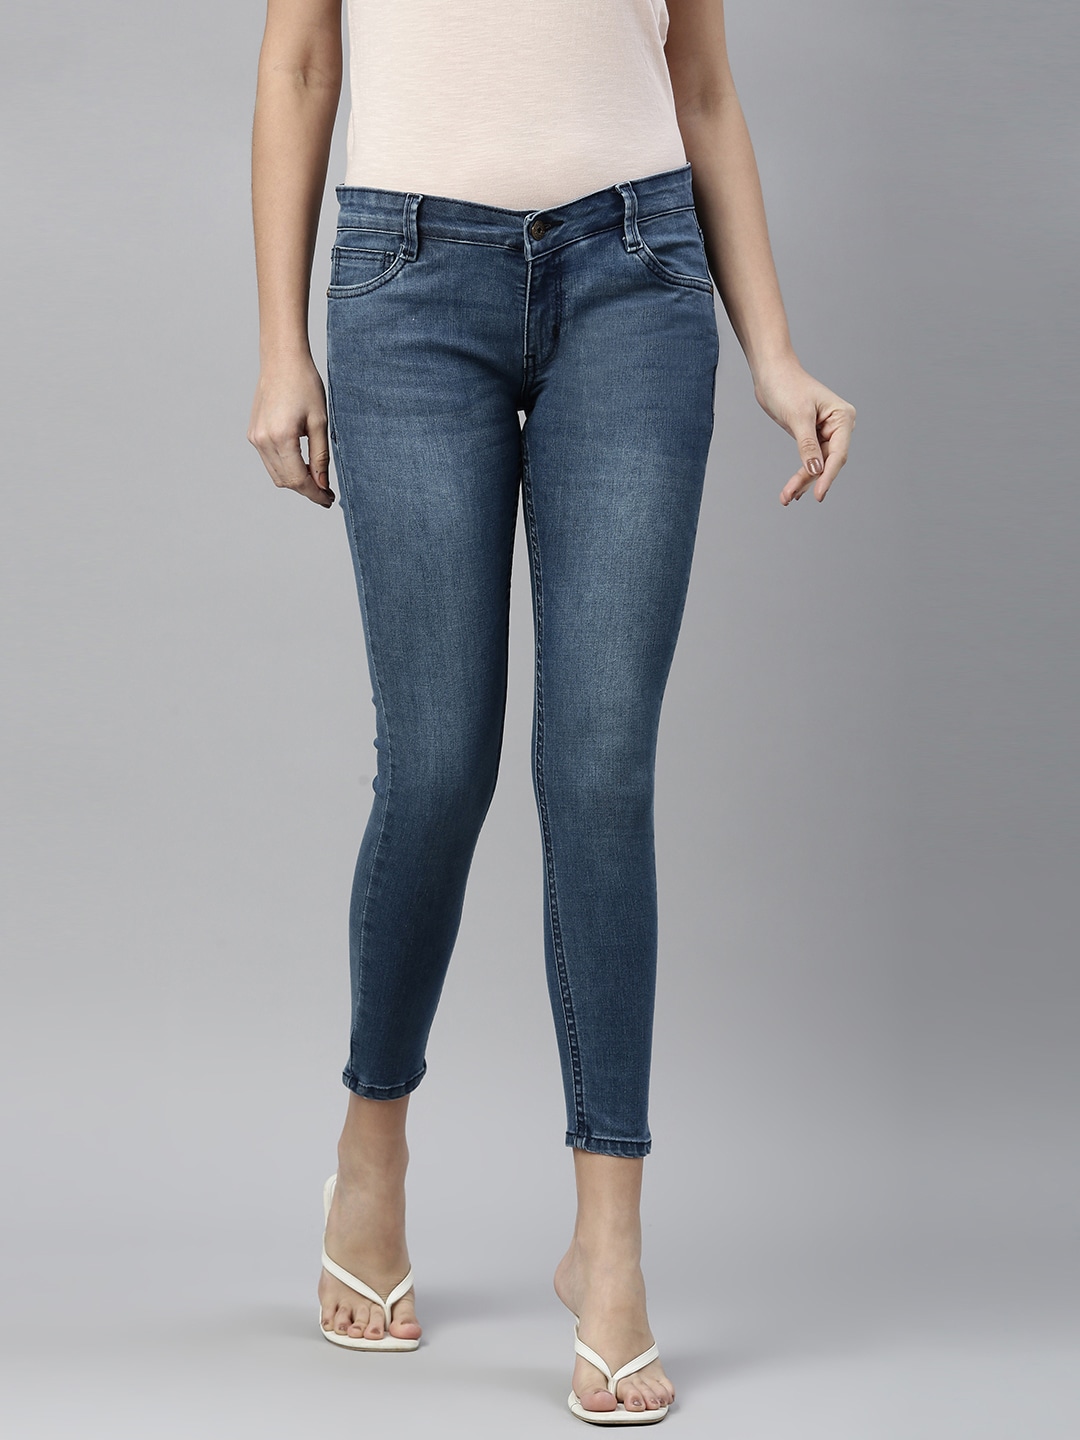 abof Women Blue Clean Look Skinny Fit Light Fade Stretchable Jeans Price in India